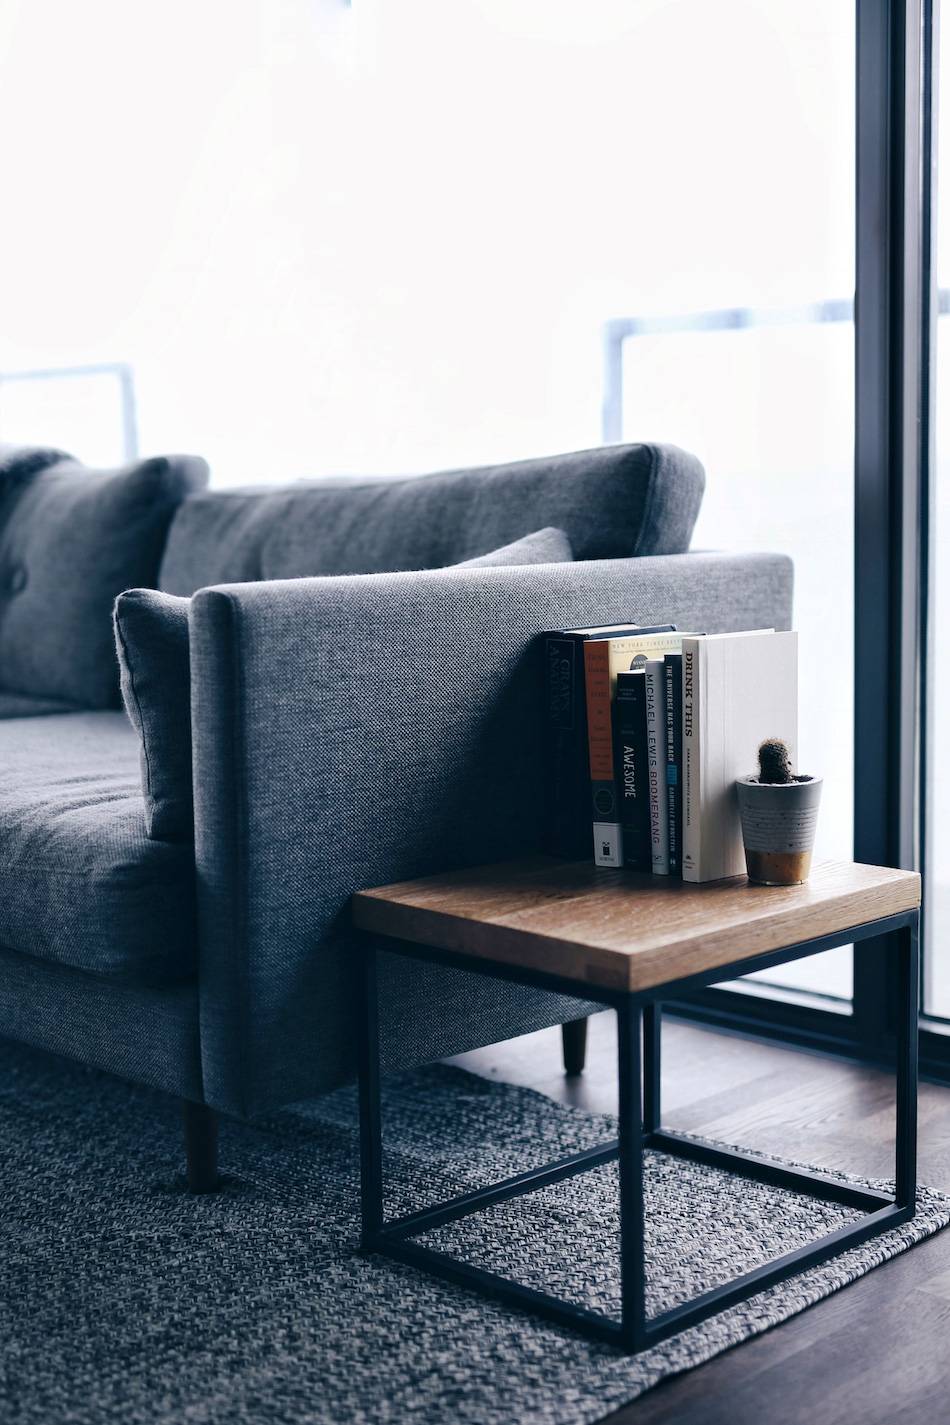 Style-and-beauty-blogger-Jill-Lansky-of-The-August-Diaries-shares-her-simple-and-minimalist-apartment,-interior-inspiration,-Article-Taiga-tables,-grey-couch